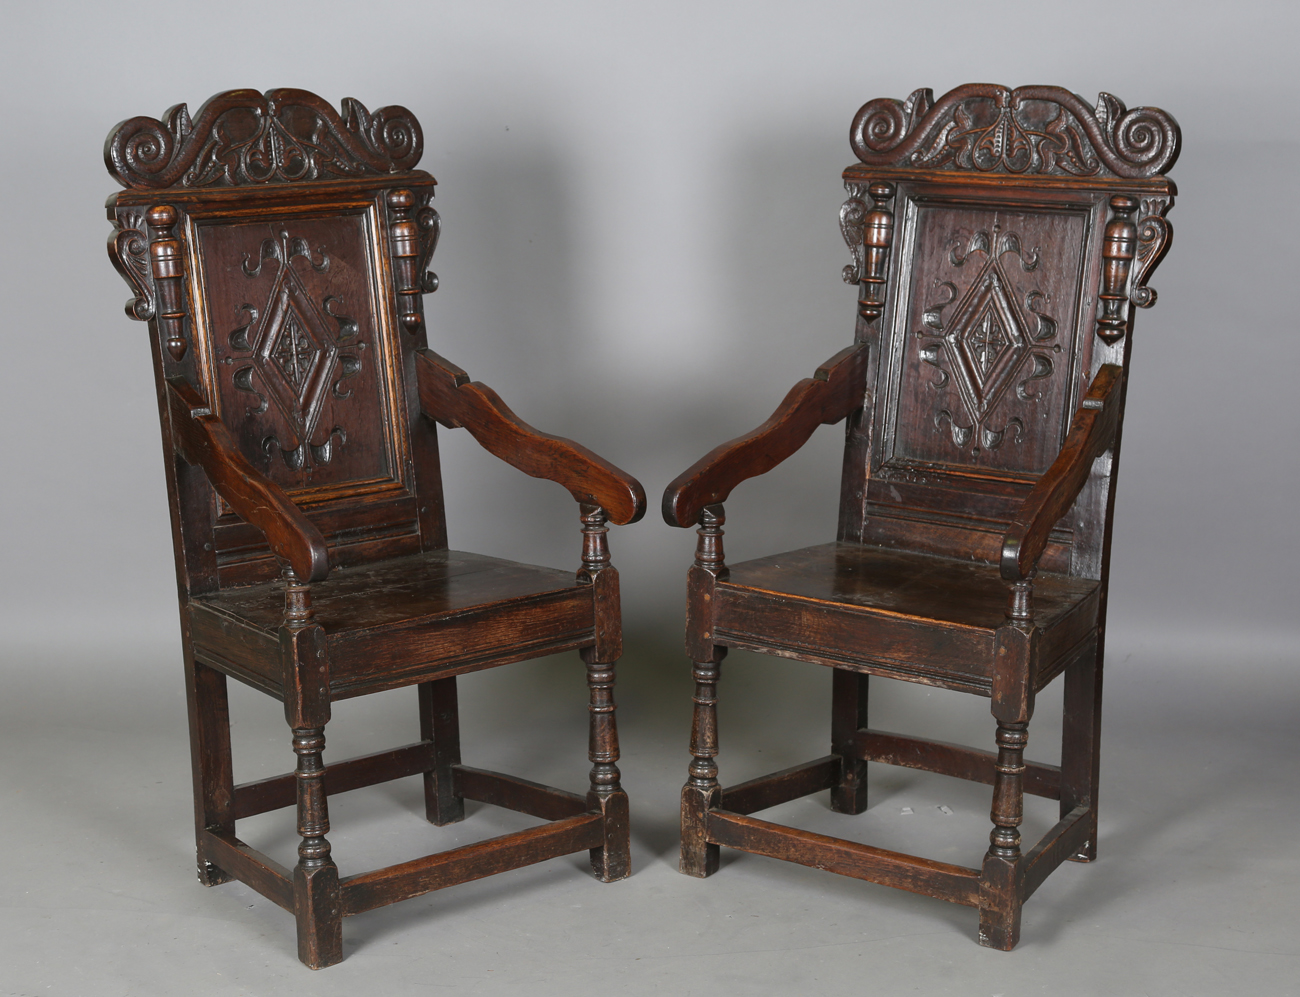 A pair of 17th century provincial oak Wainscot armchairs with carved panel backs and solid panel